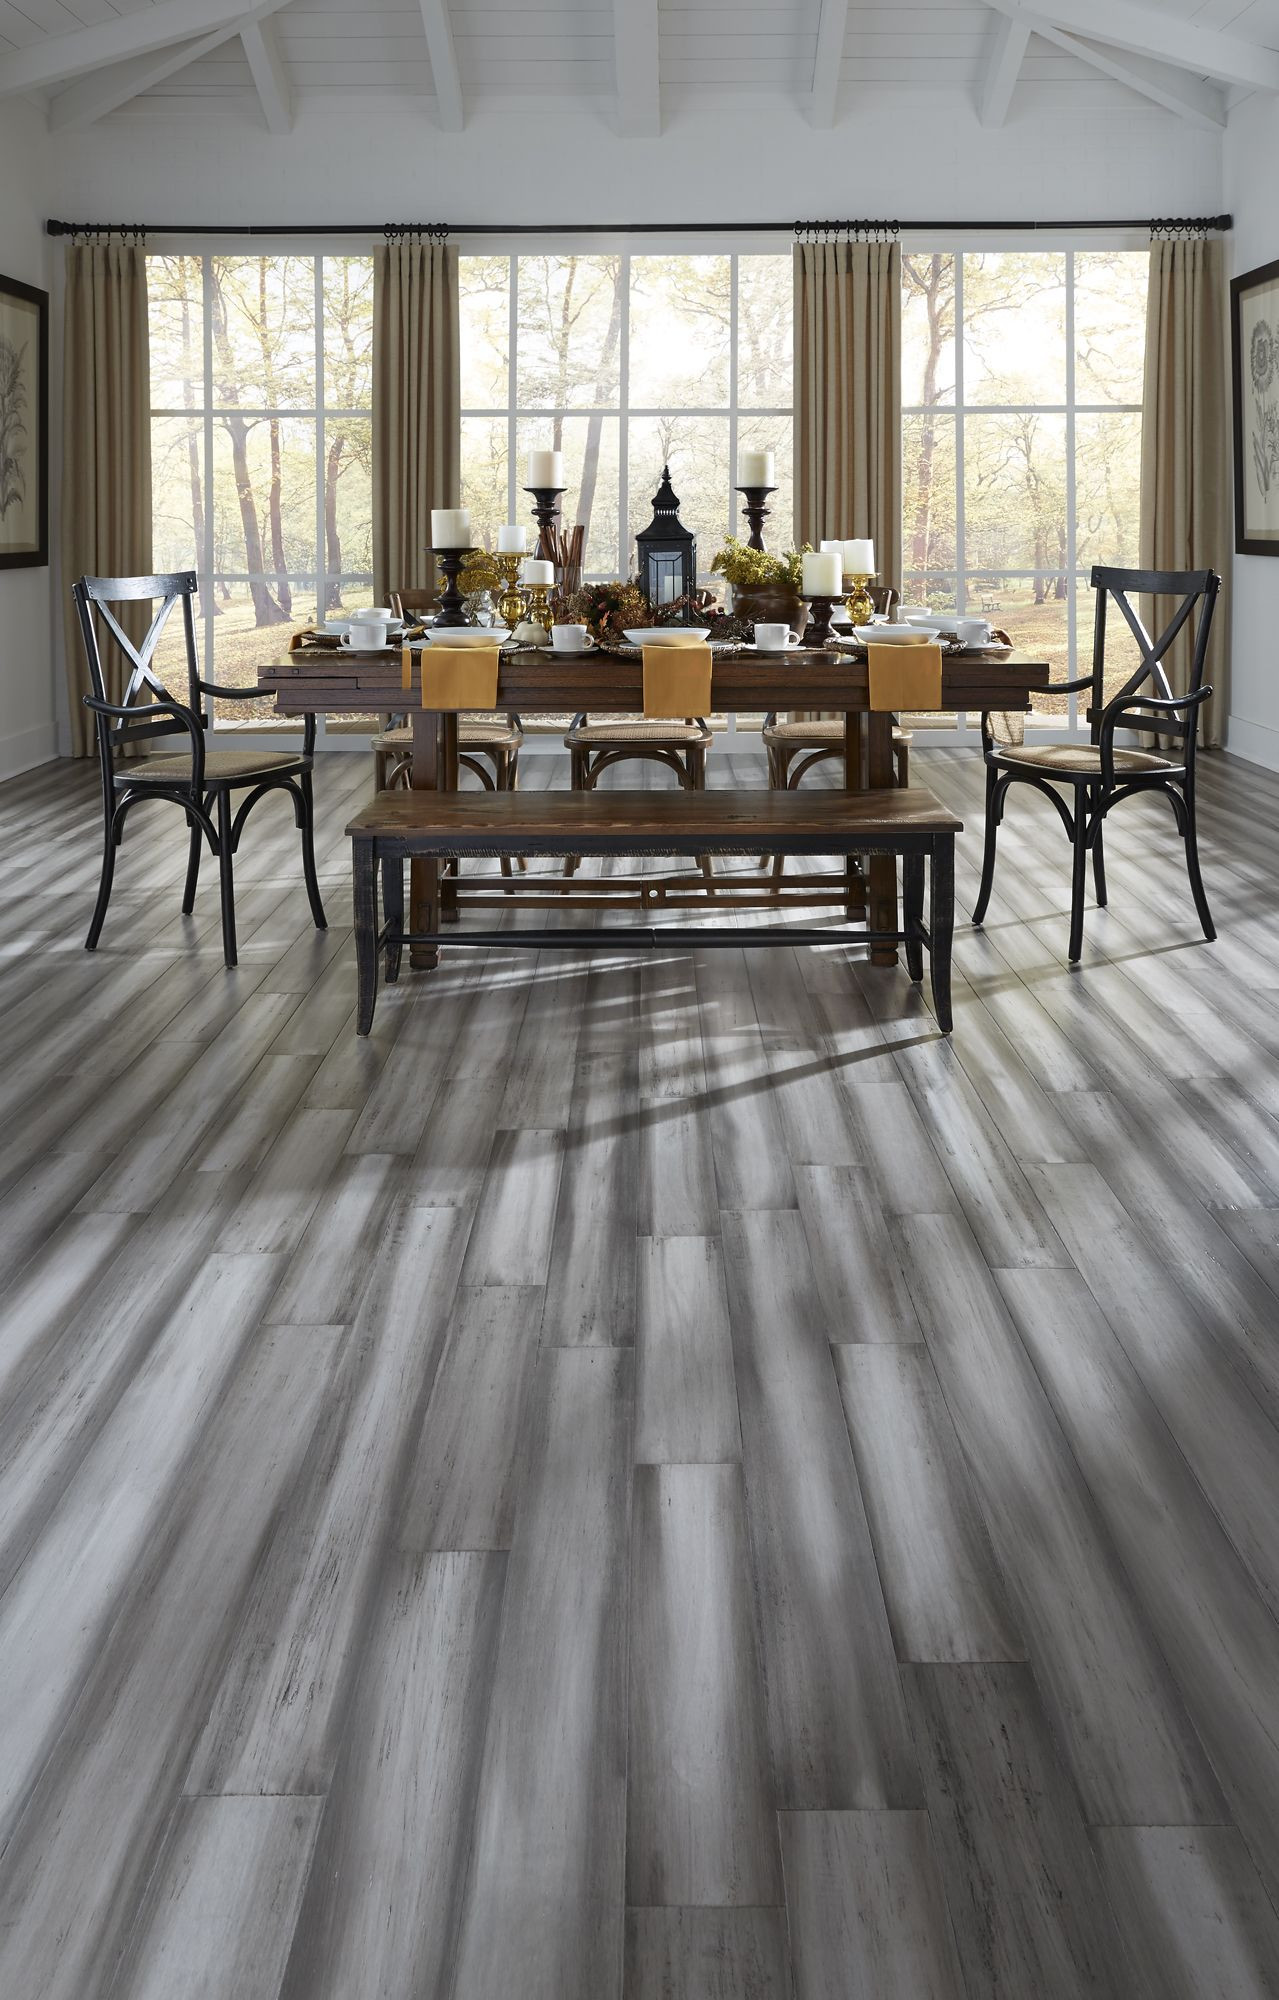 21 Nice Bamboo Engineered Hardwood Flooring Reviews 2024 free download bamboo engineered hardwood flooring reviews of modern design and rustic texture pair perfectly with the stately within pair perfectly with the stately blend of light and dark gray shades to 